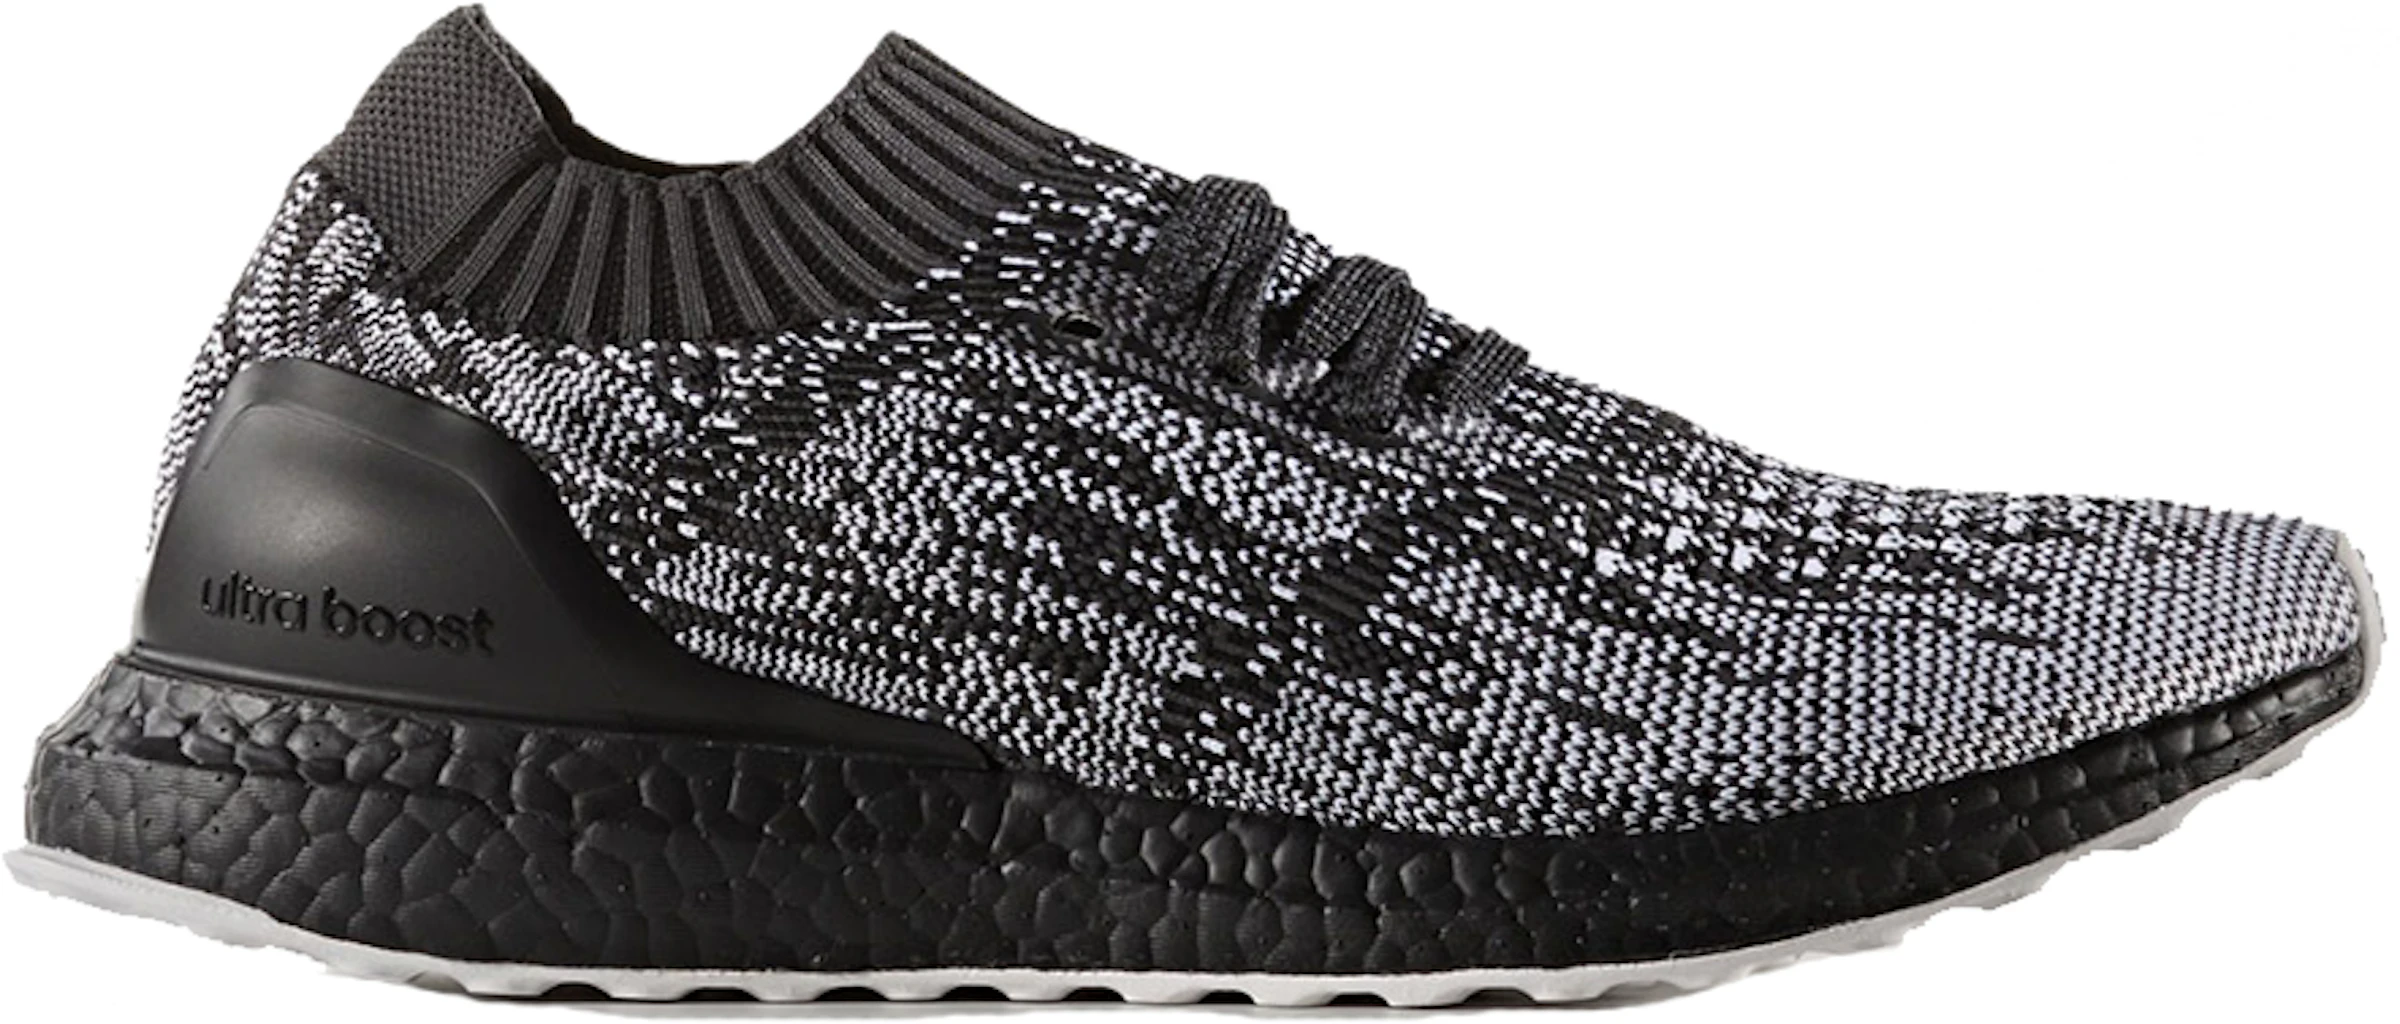 adidas Ultra Boost Uncaged Black White - S80698 -